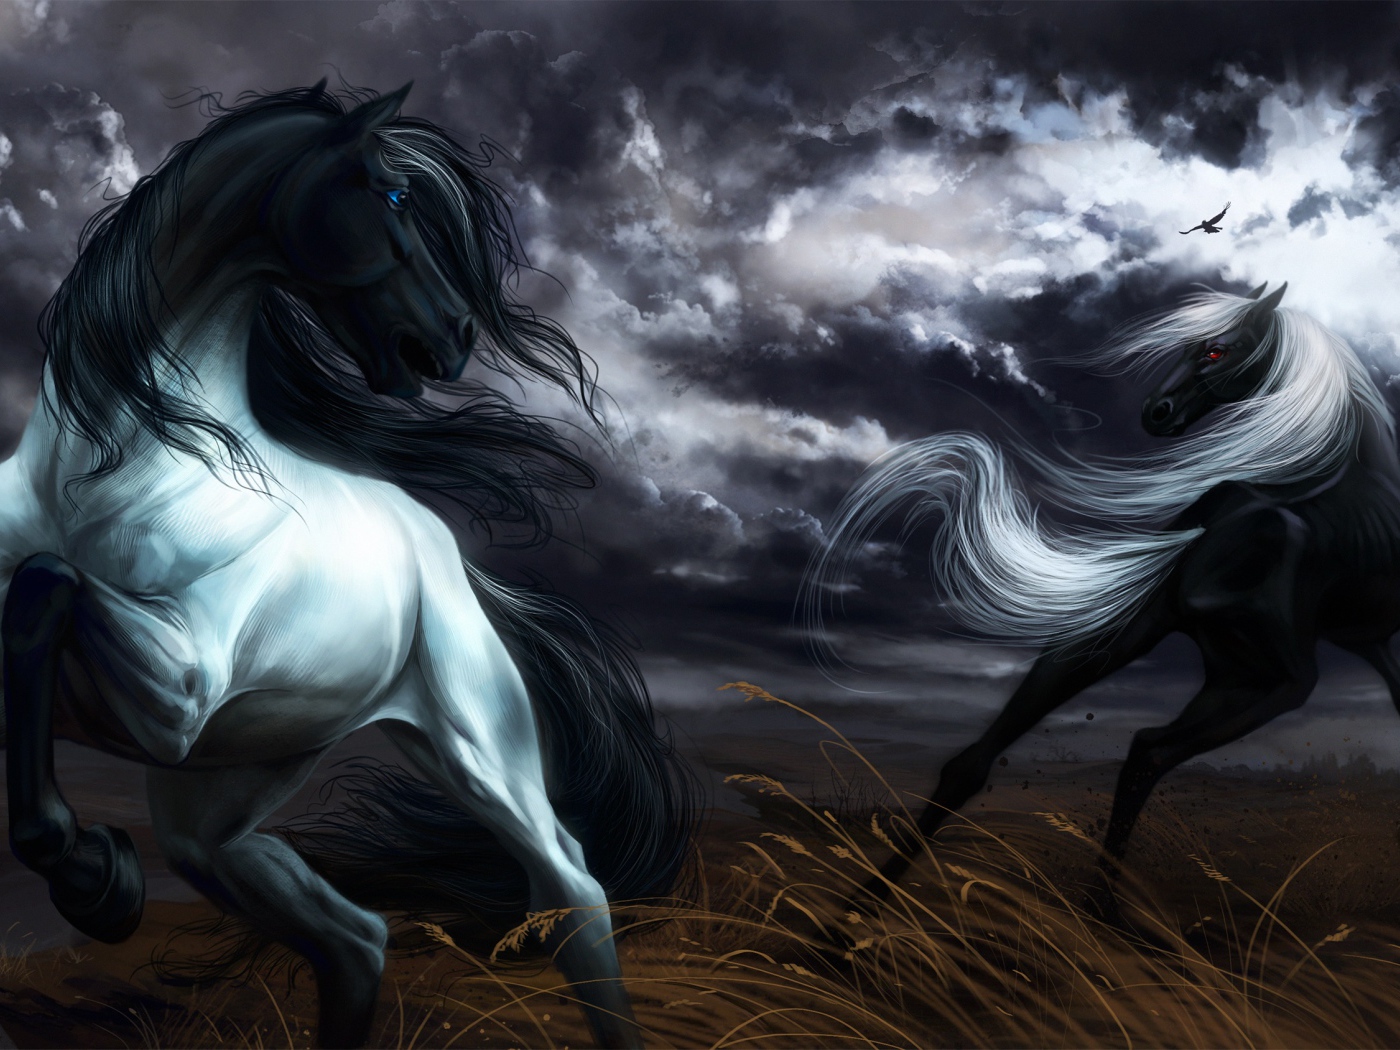 Two painted black horses jumping under a stormy sky